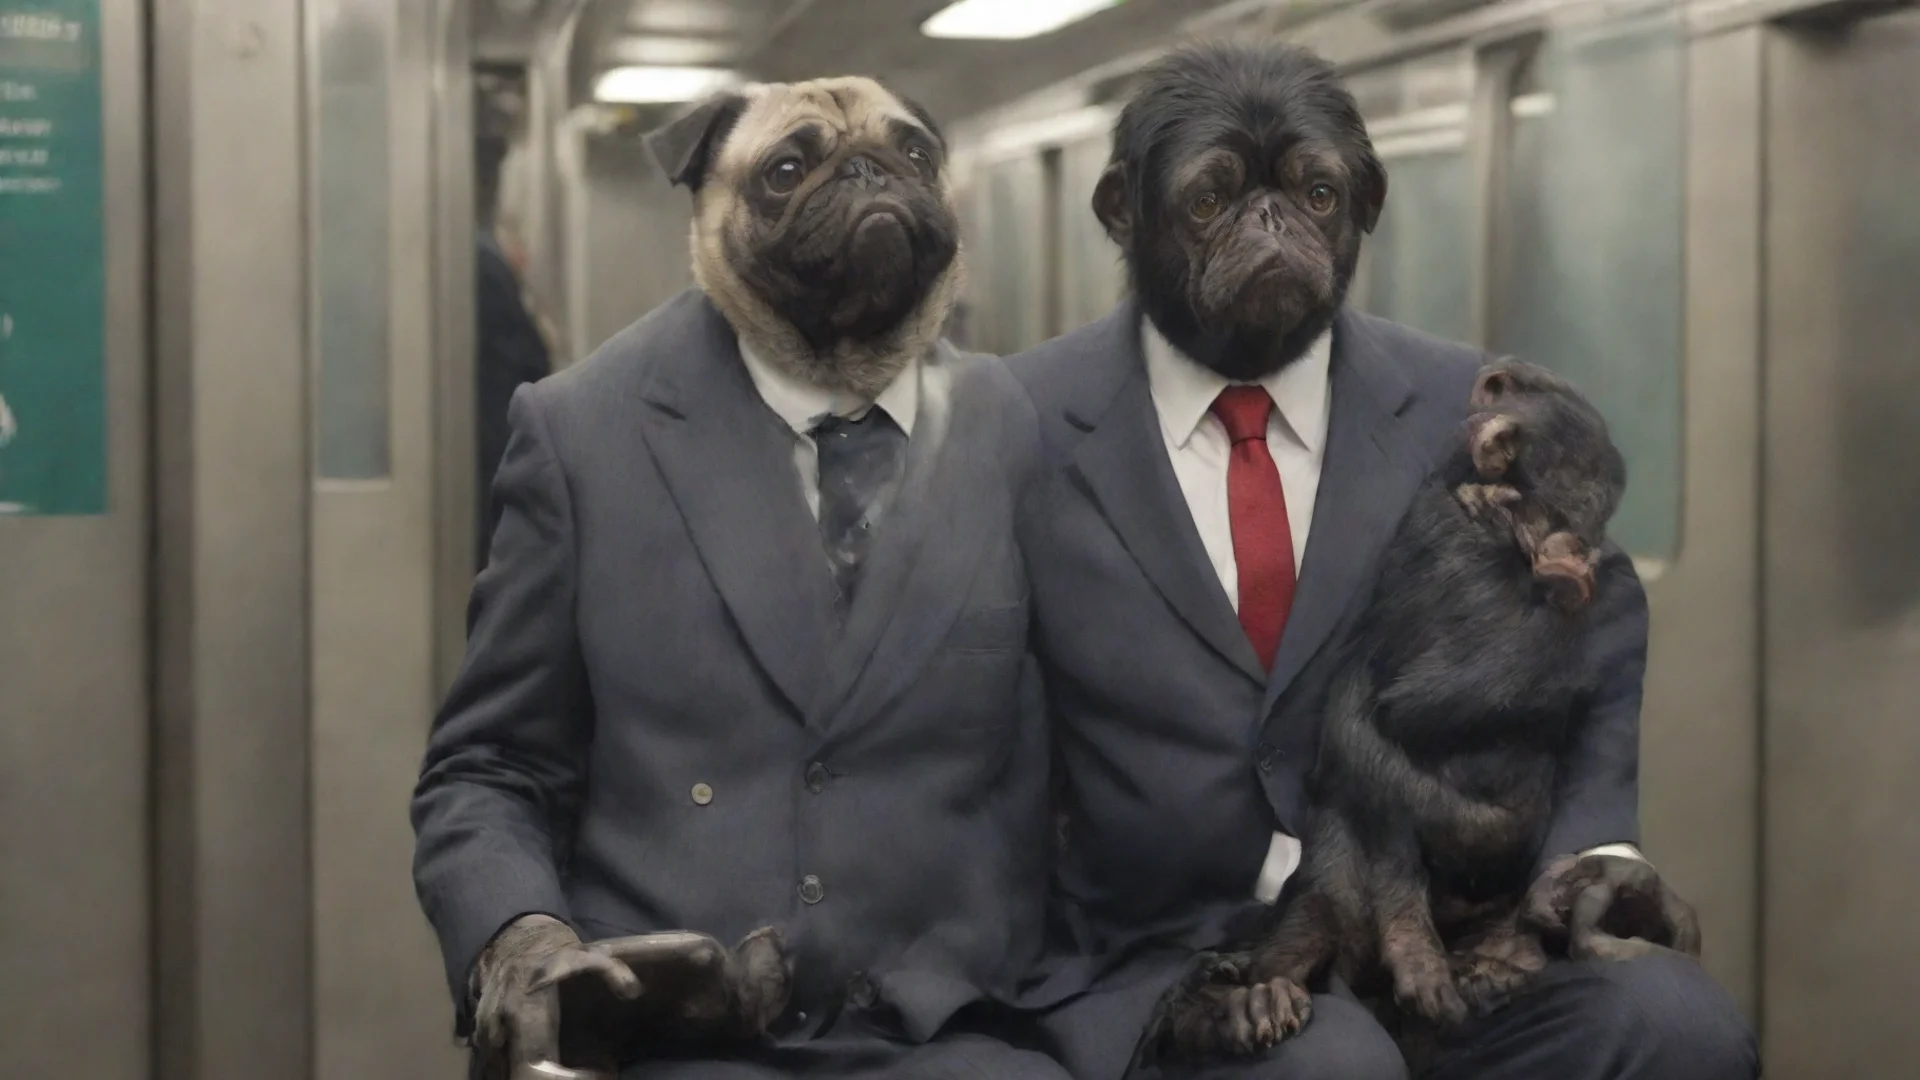 aitrending a pug and a chimpanzee wearing business suits riding the subway to work. good looking fantastic 1 wide